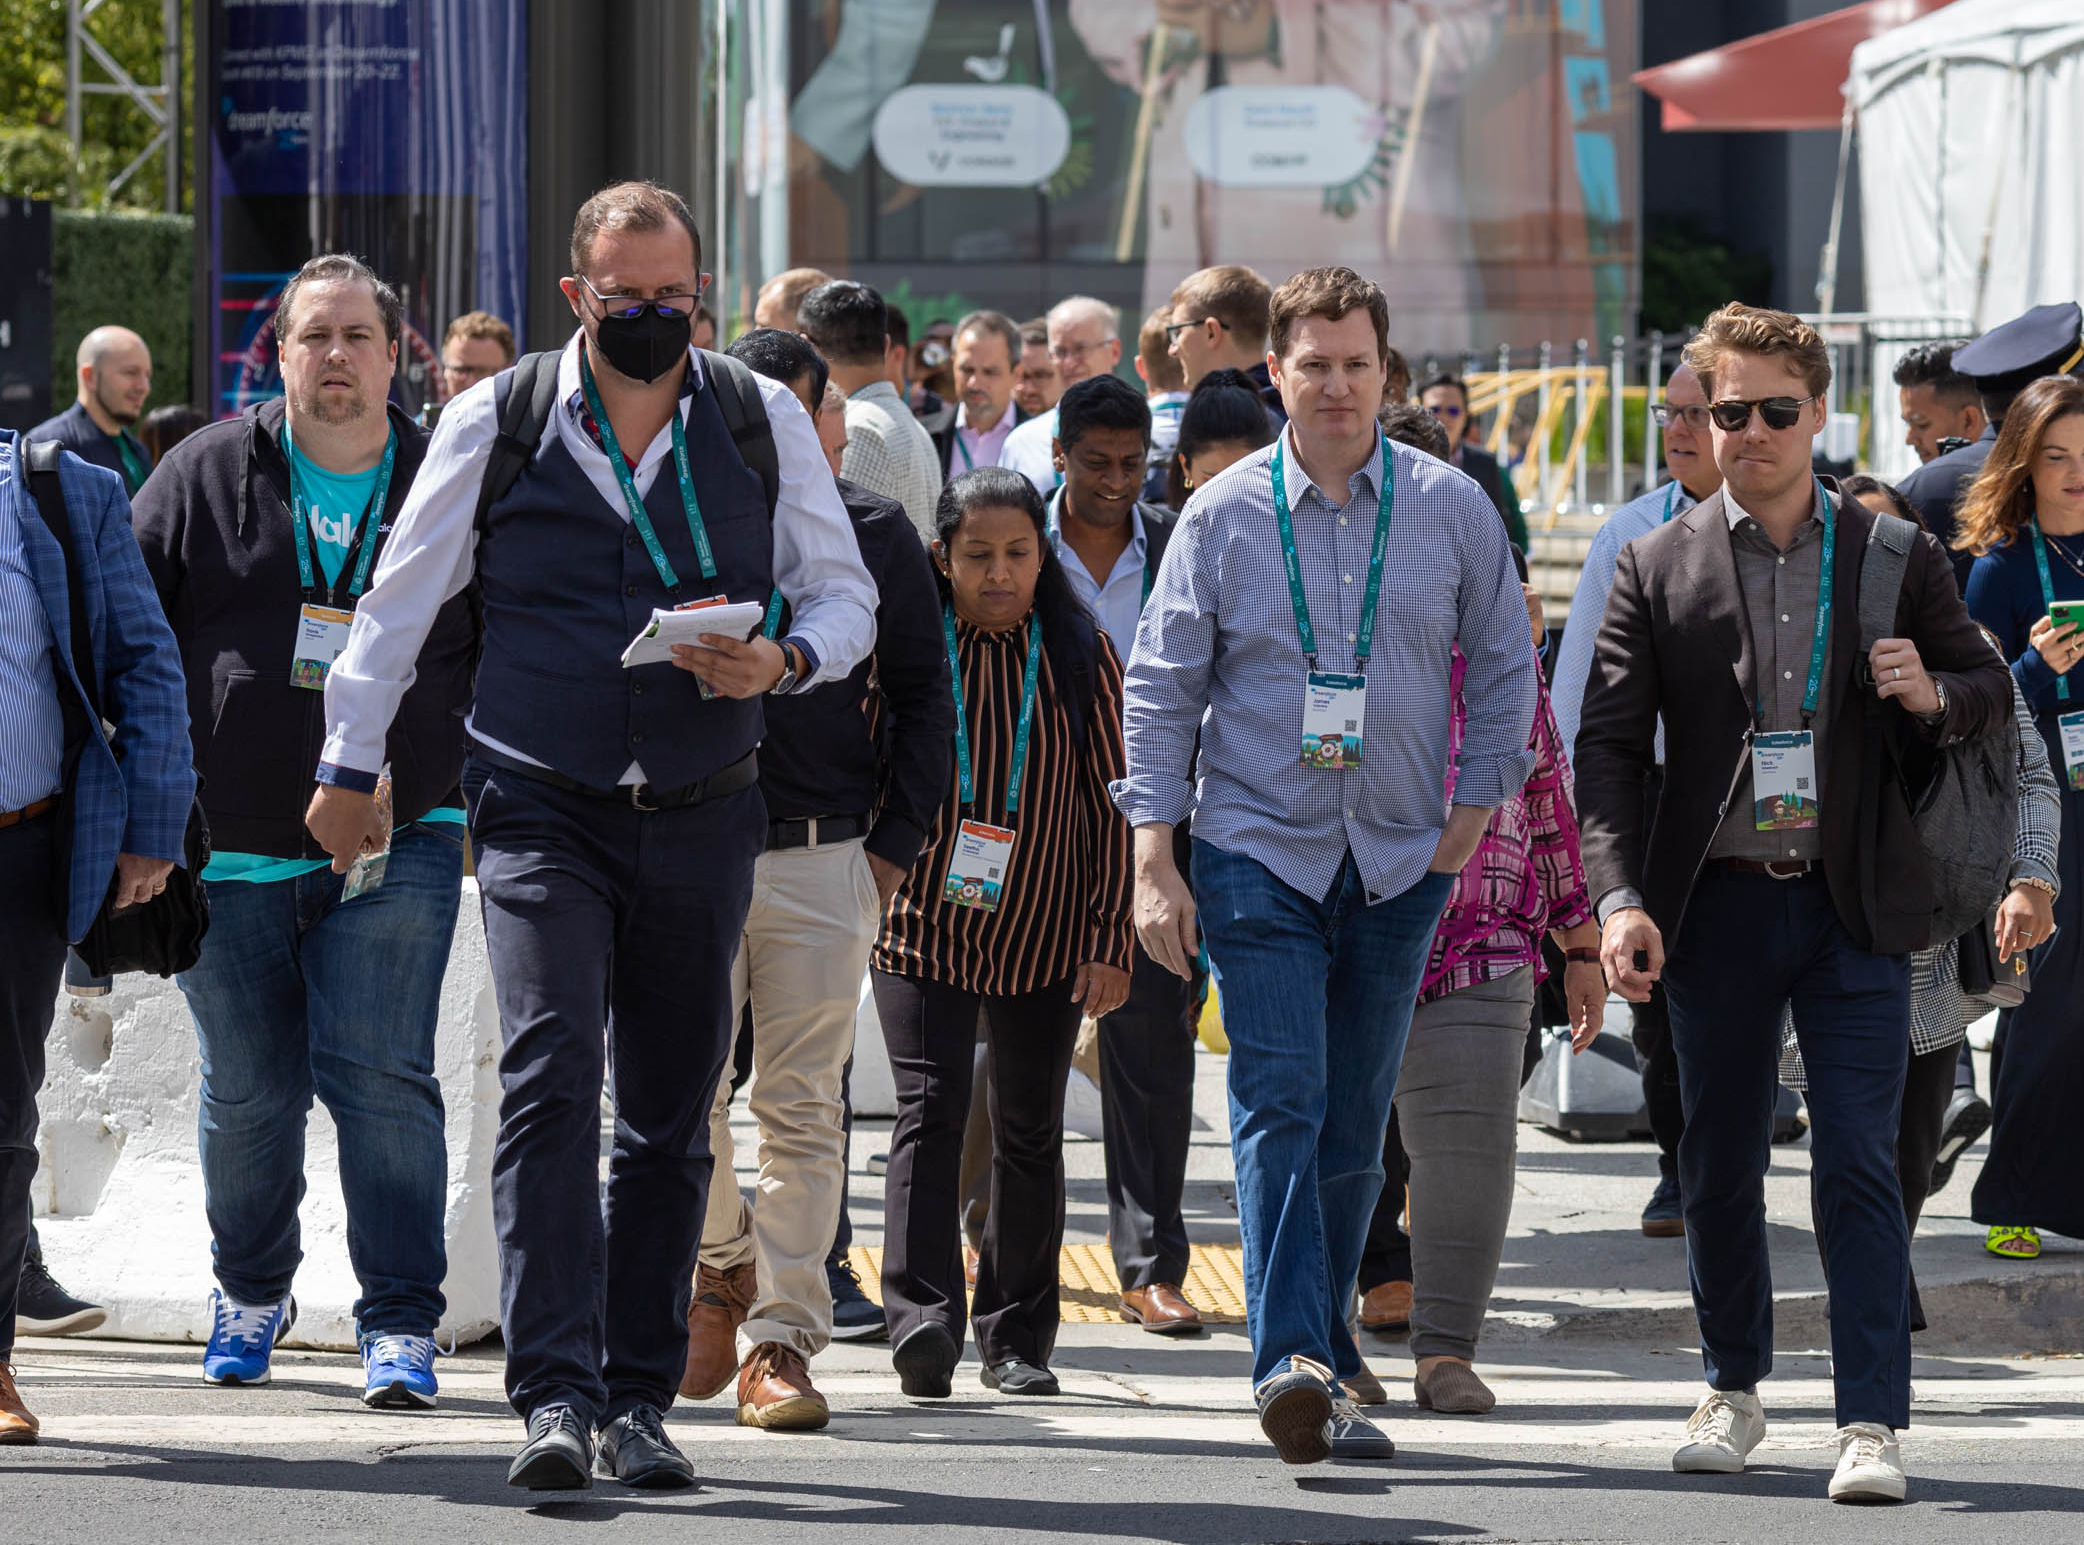 A crowd of Dreamforce attendees cross the street in San Francisco.